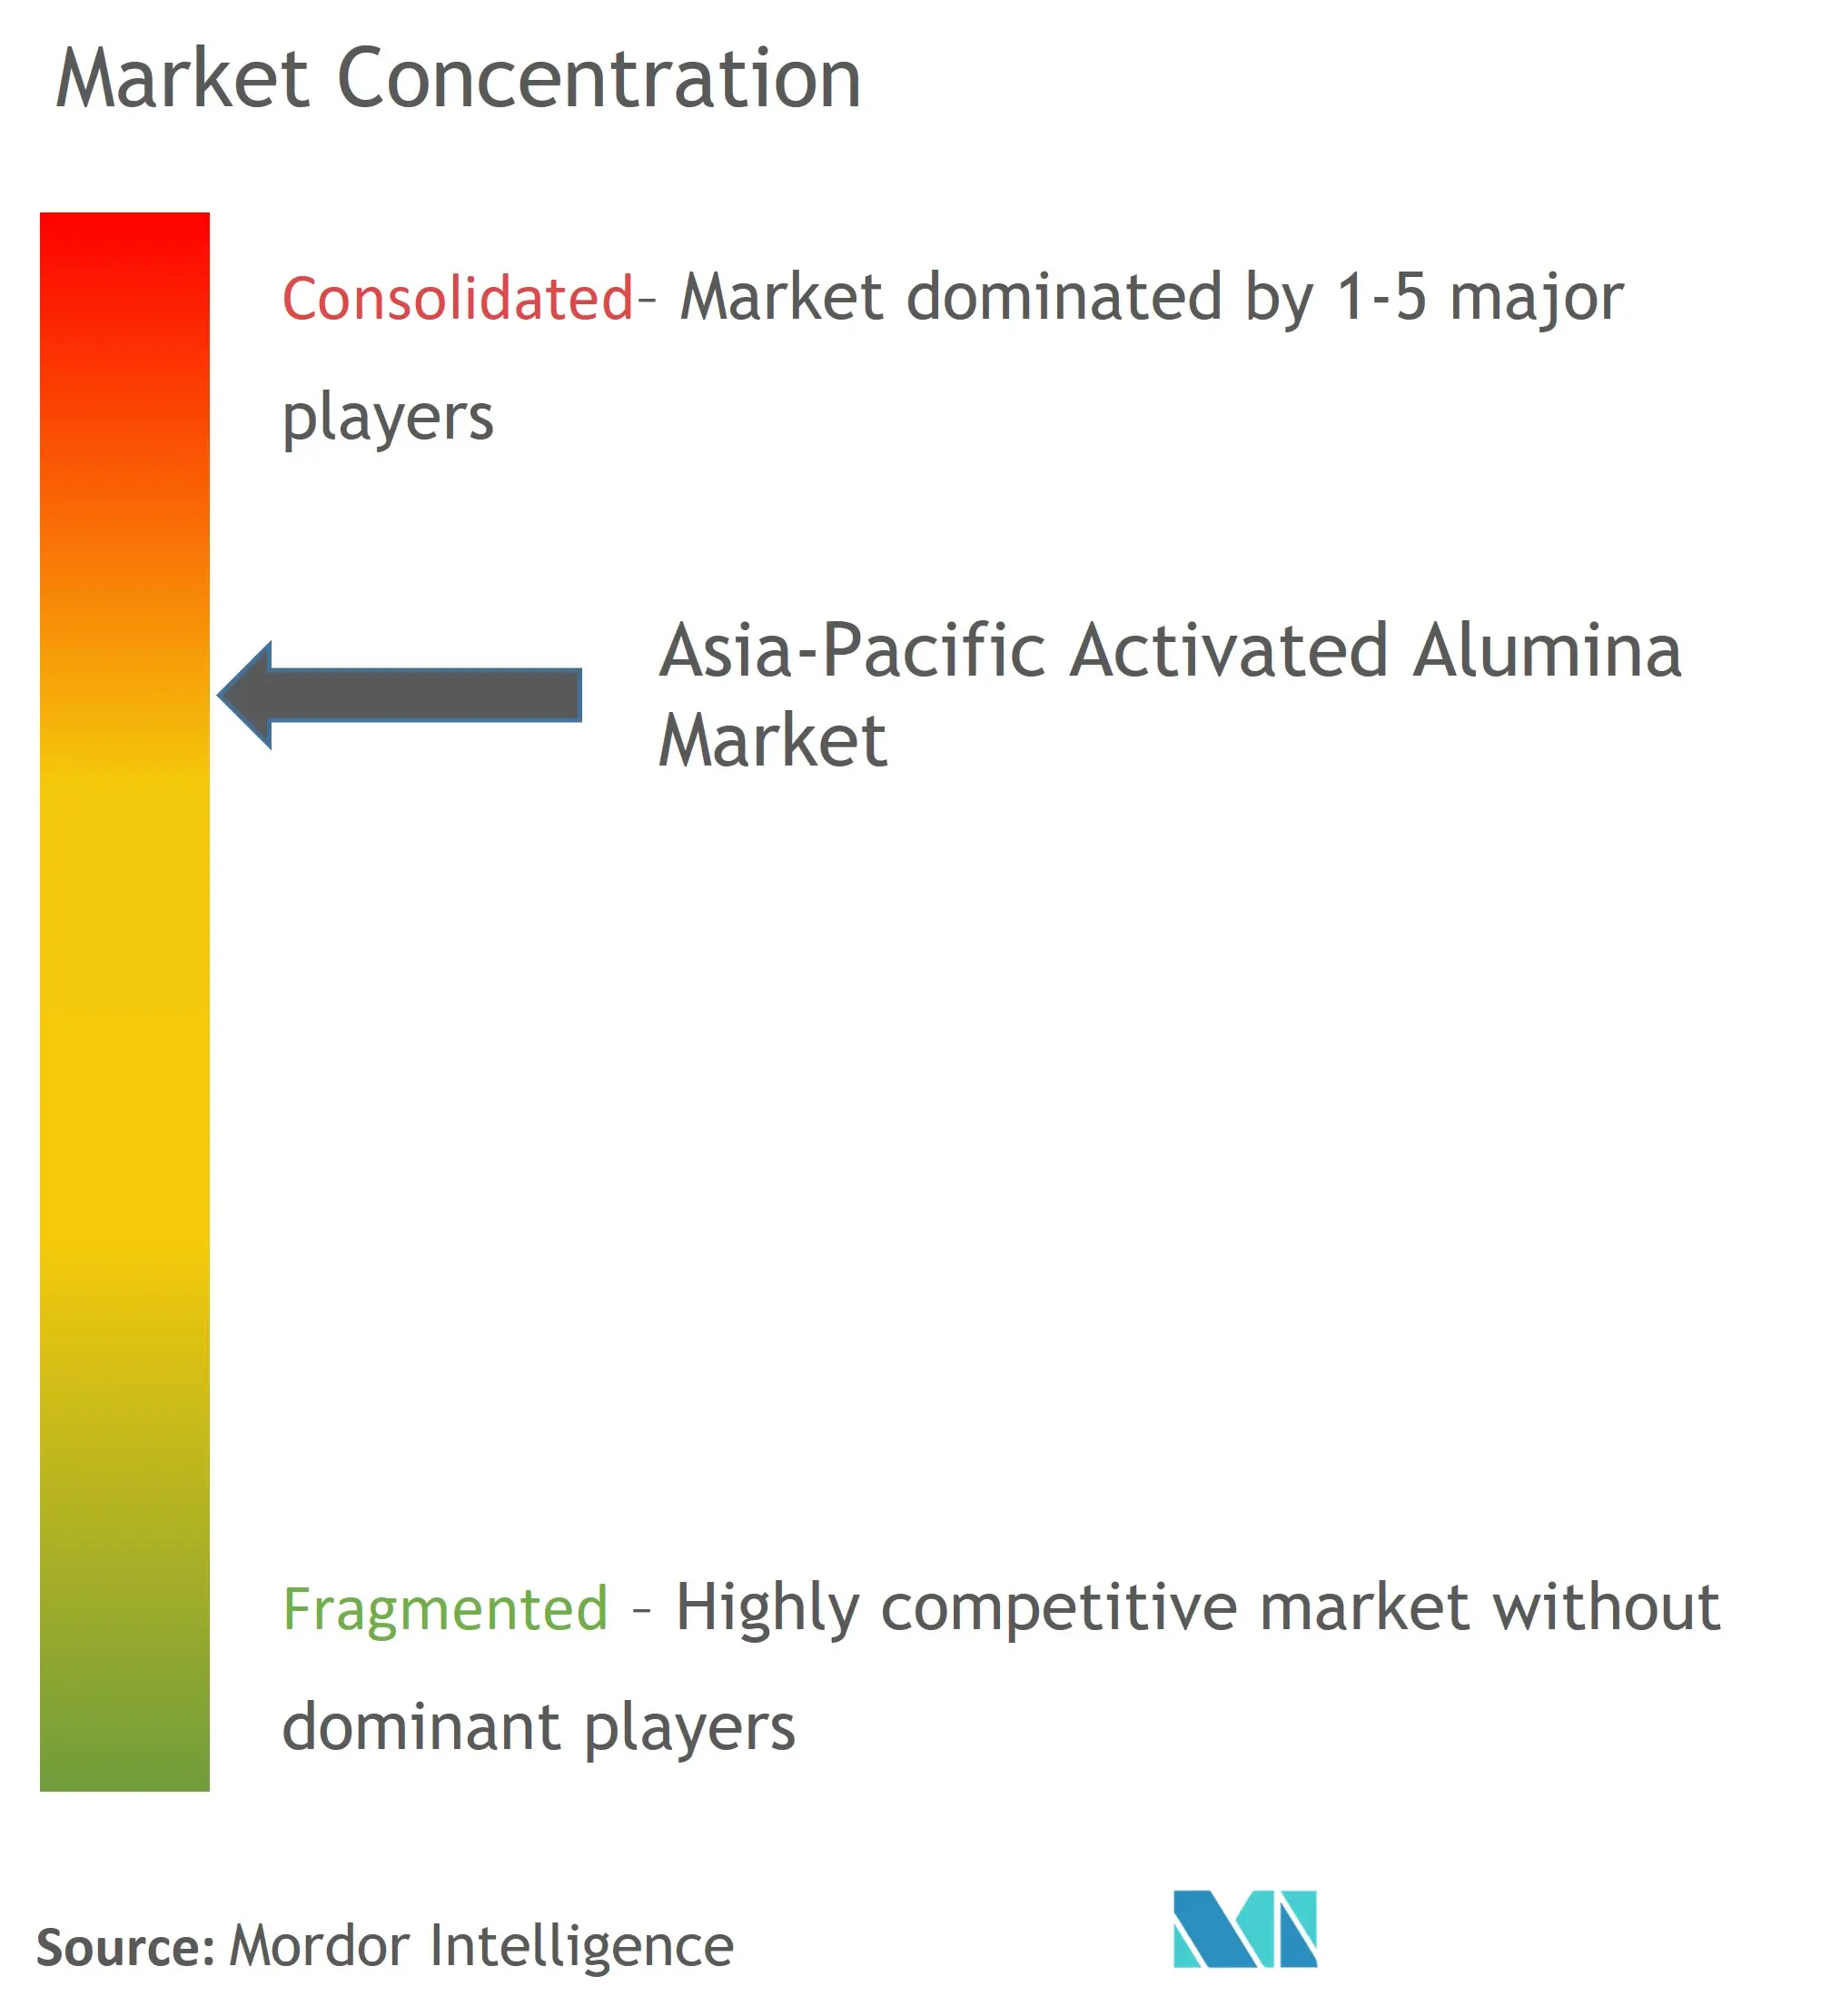 Asia-Pacific Activated Alumina Market Concentration